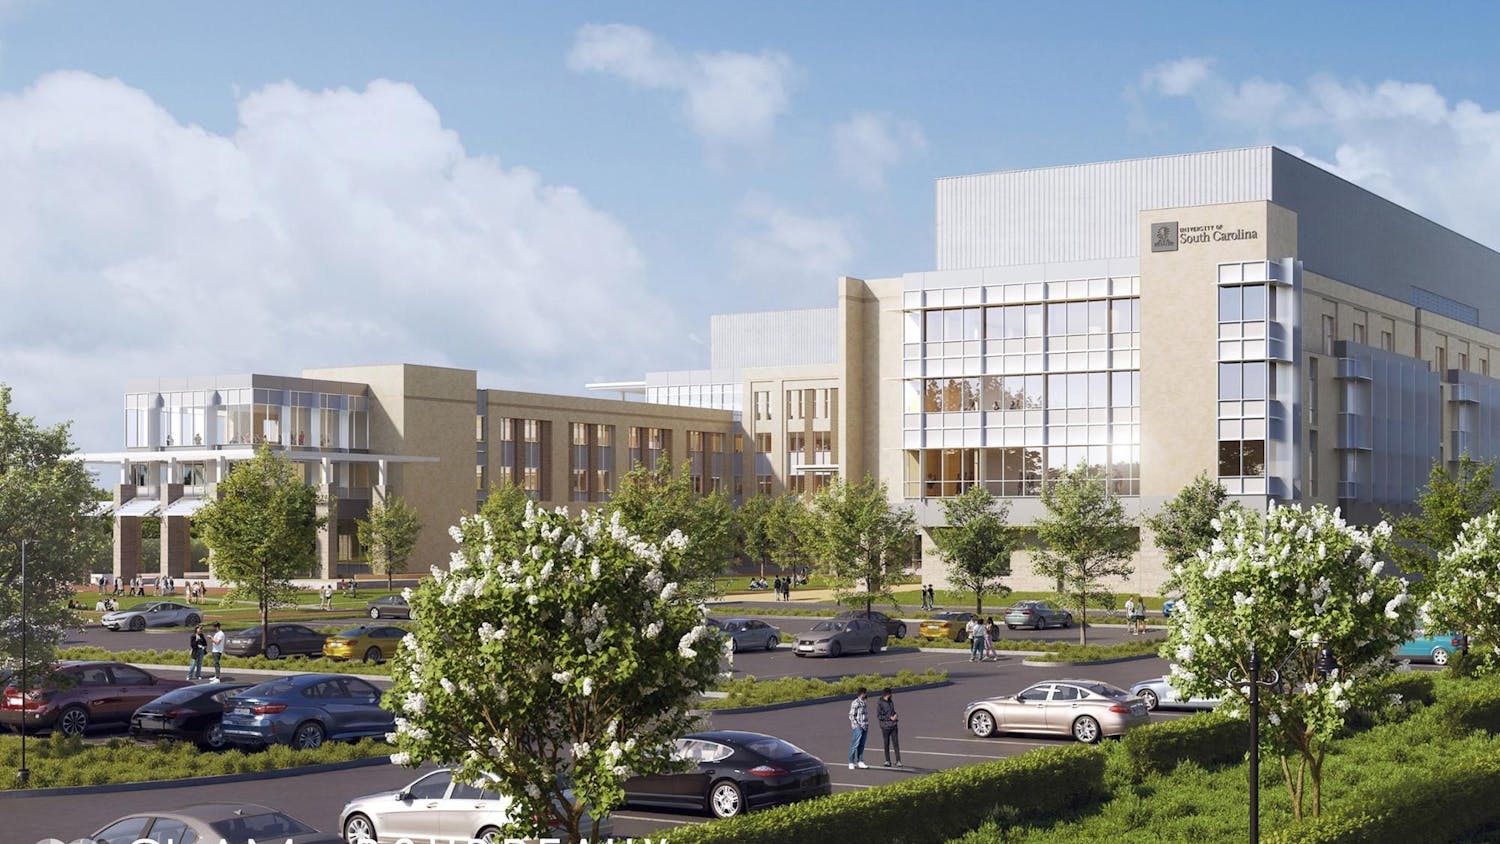 A rendered image of the future building for South Carolina's School of Medicine. The building is set to be located in the BullStreet district and is slated to be completed by the fall of 2027. The original plan included two separate buildings but was amended to include only one to reflect collaboration between education and research.